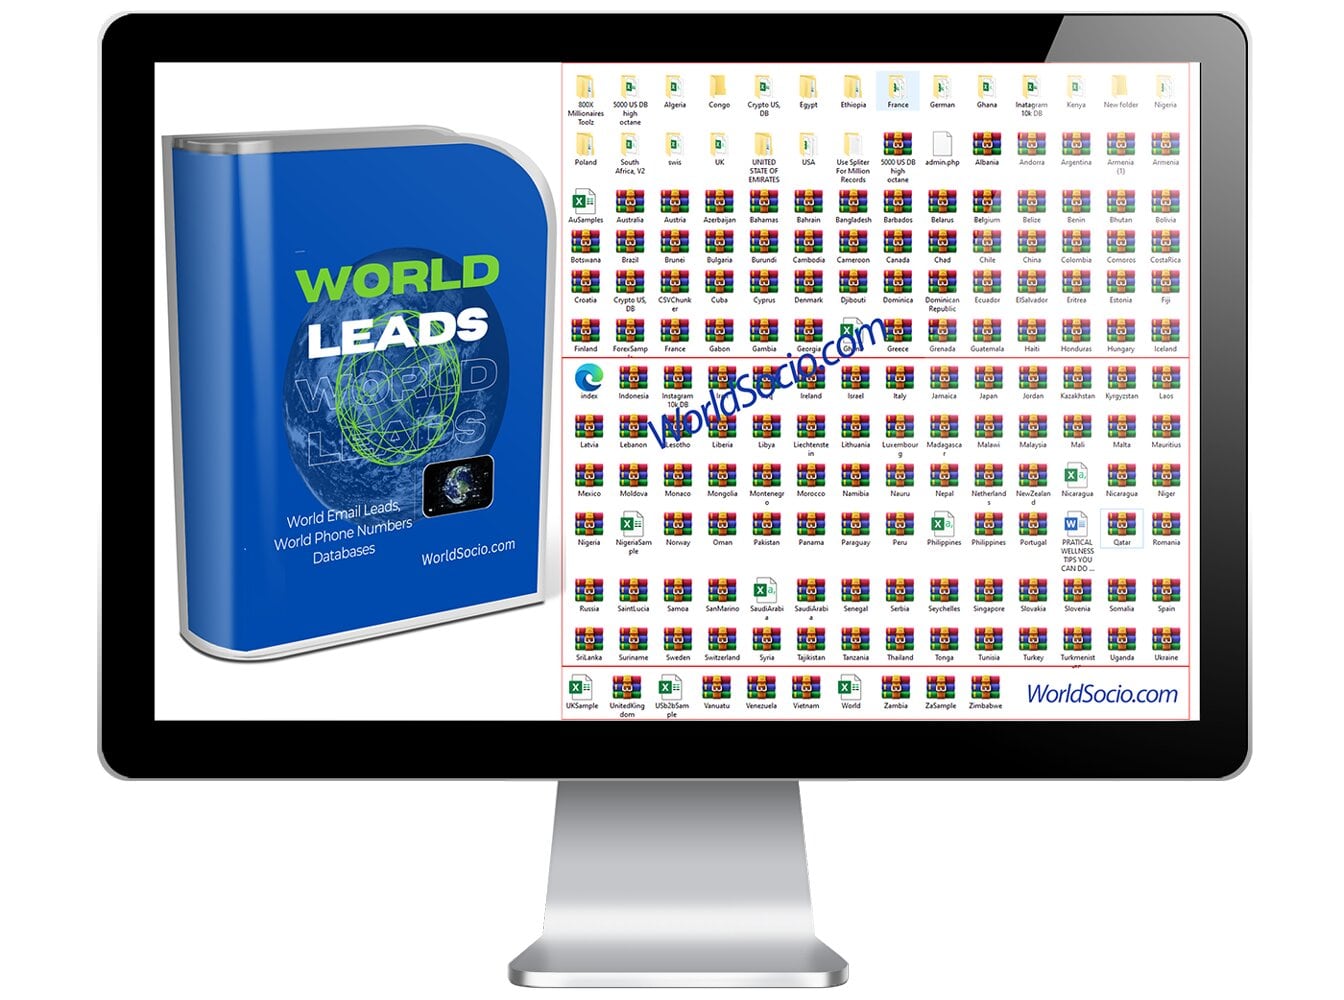 World-Email-Leads-Database,-world-Email-List-and-phone-numbers.jpg